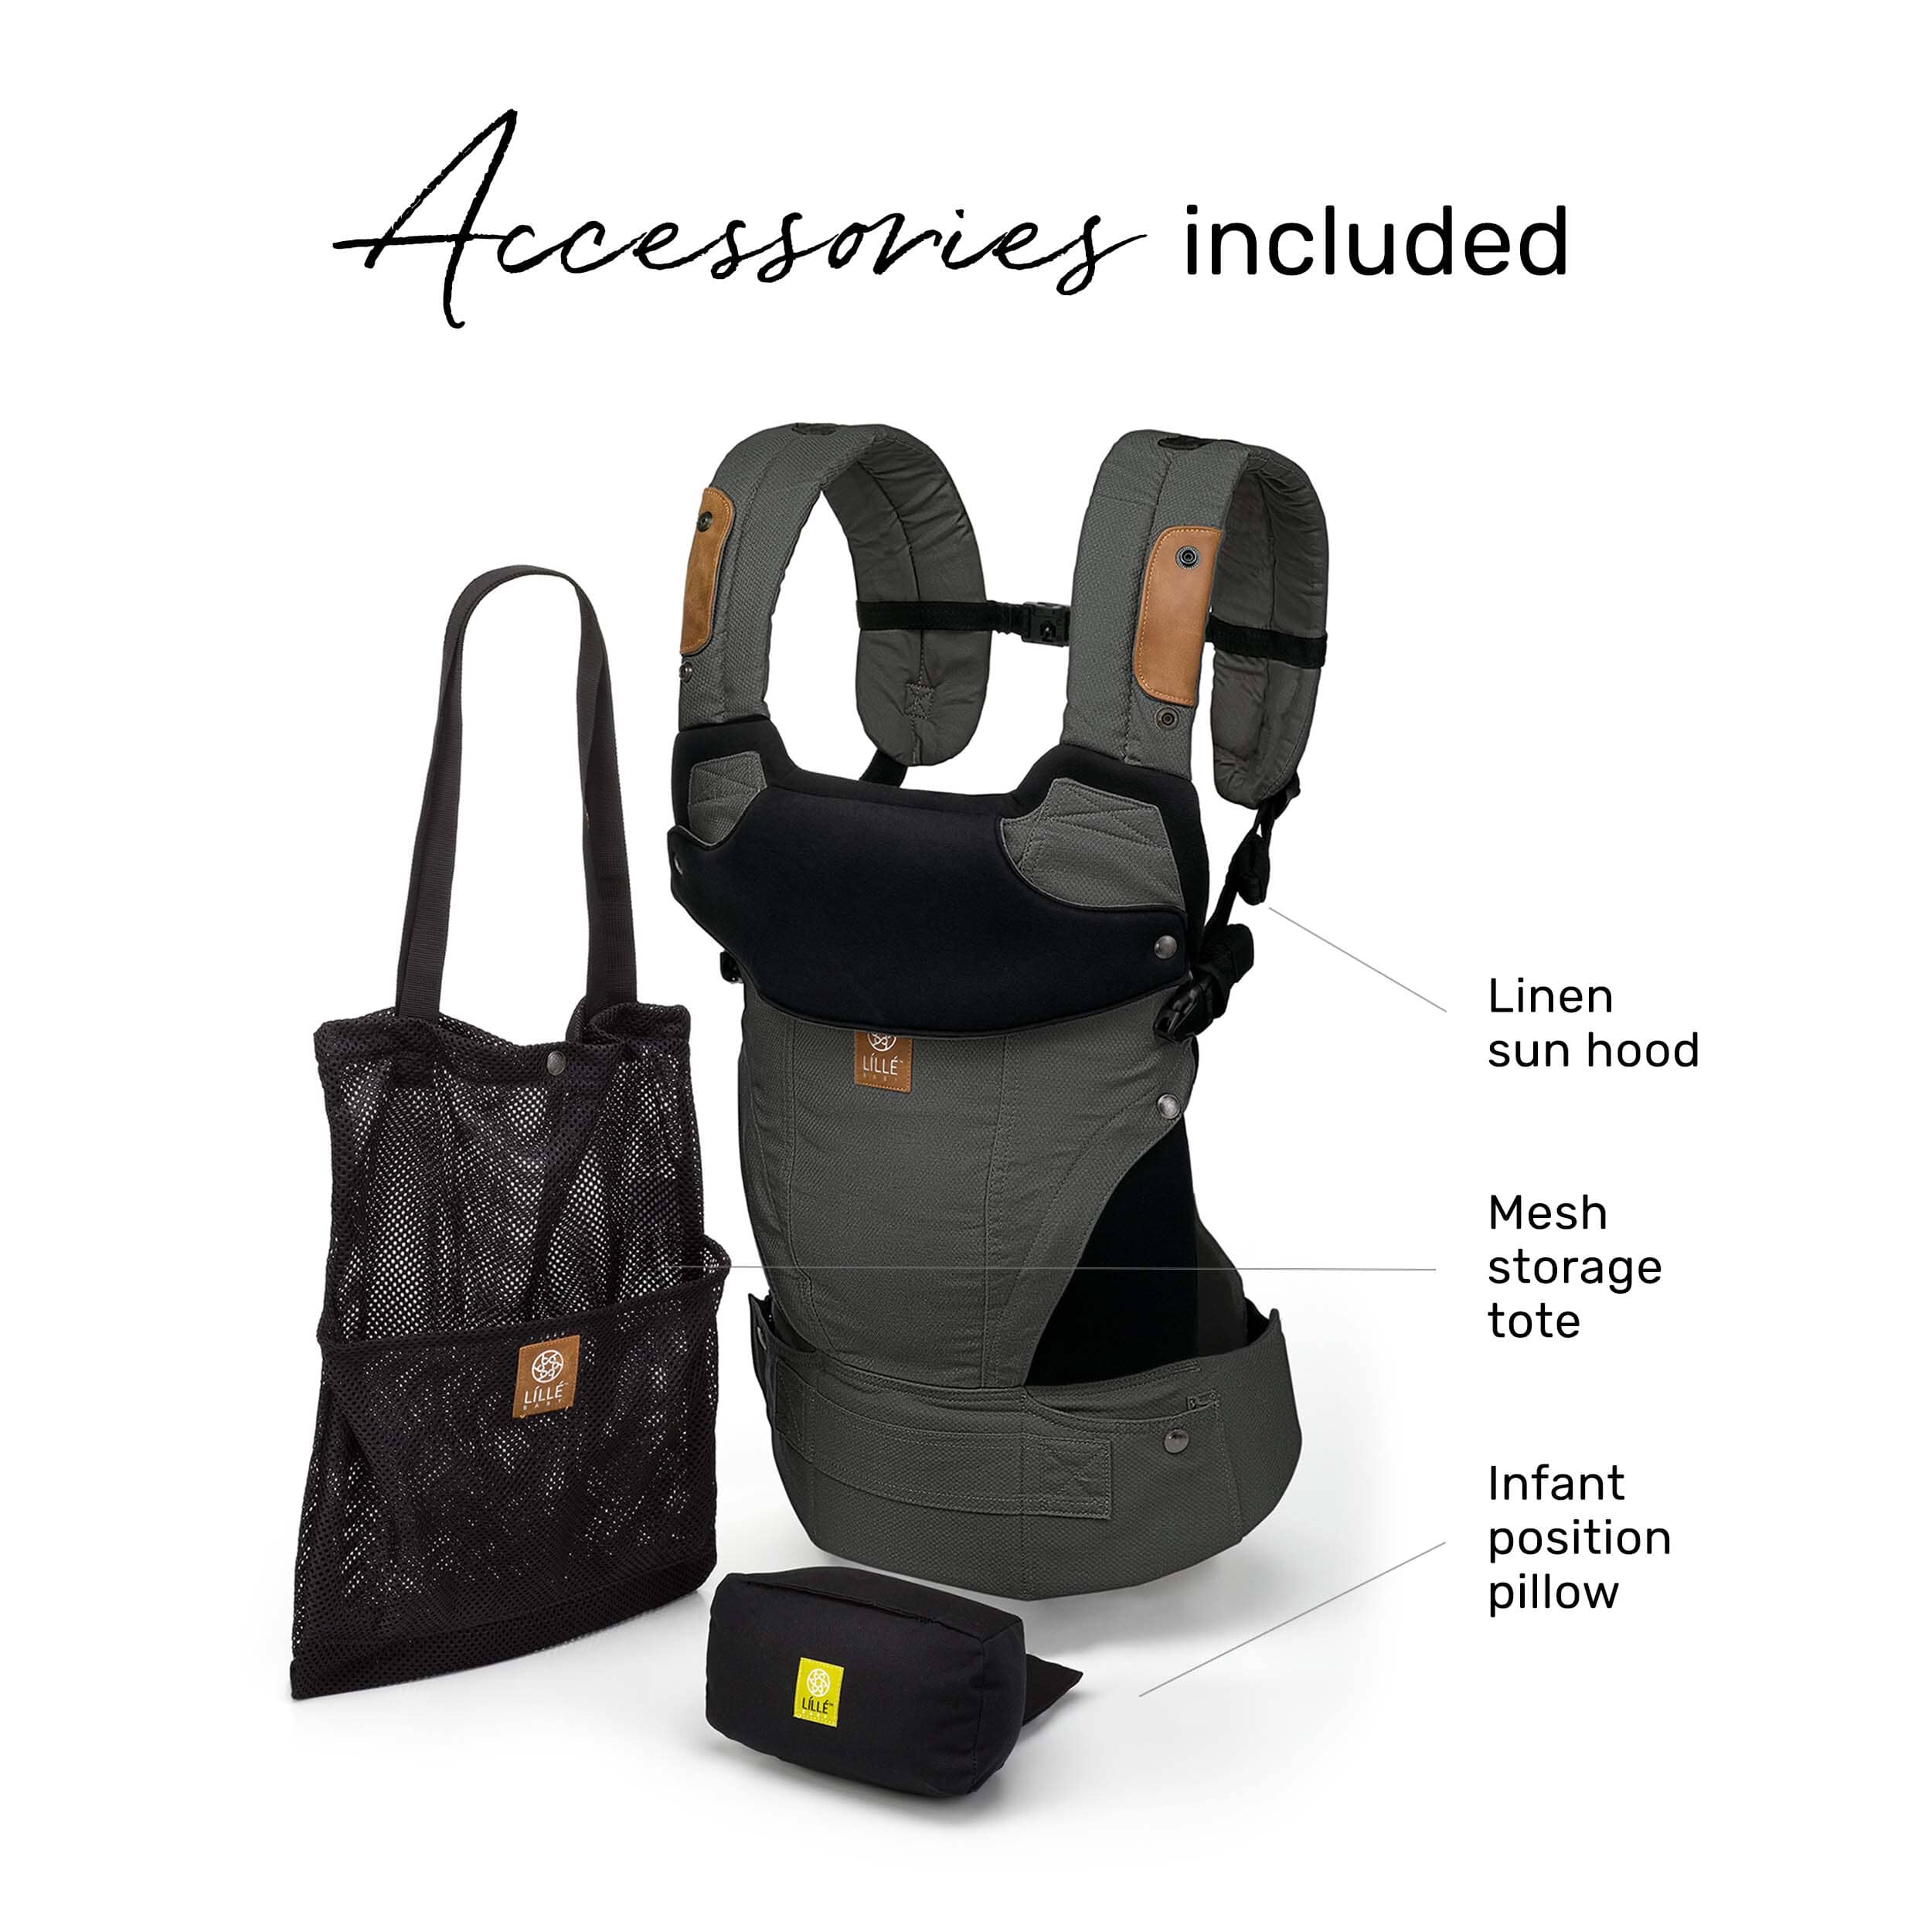 Elevate accessories included with purchase of a carrier. Pictured carrier, linen sun hood, mesh storage tote and infant position pillow.